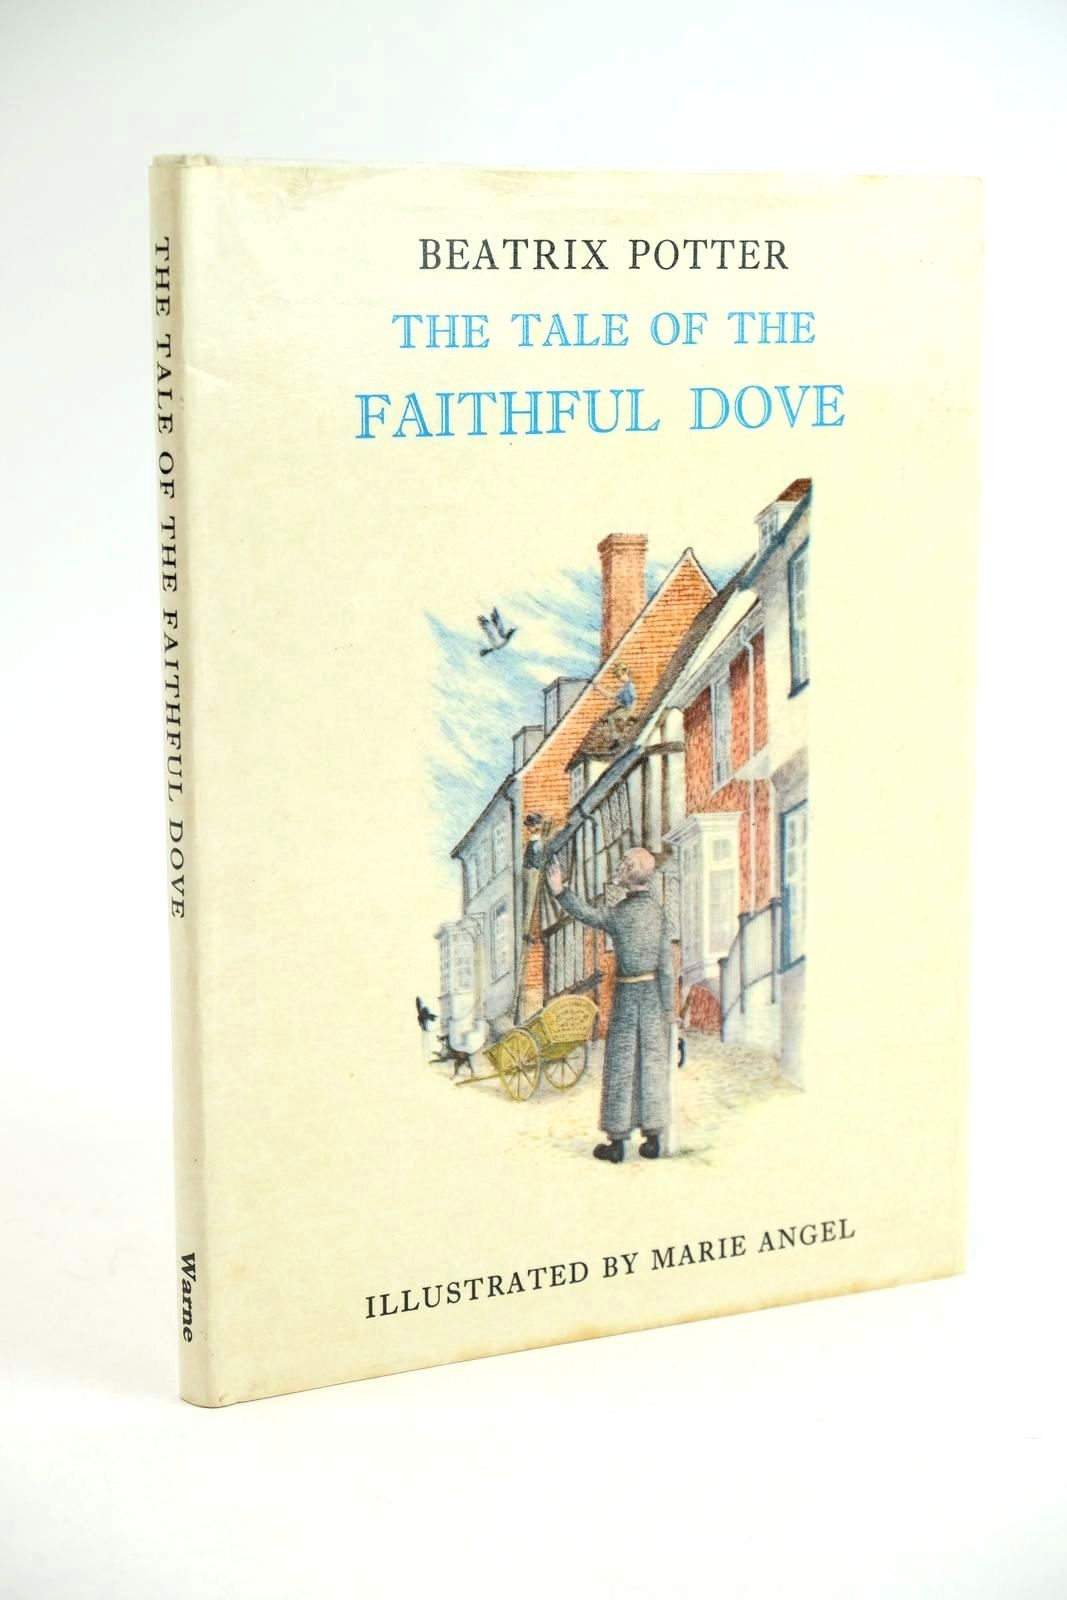 Photo of THE TALE OF THE FAITHFUL DOVE written by Potter, Beatrix illustrated by Angel, Marie published by Frederick Warne & Co Ltd. (STOCK CODE: 1323464)  for sale by Stella & Rose's Books